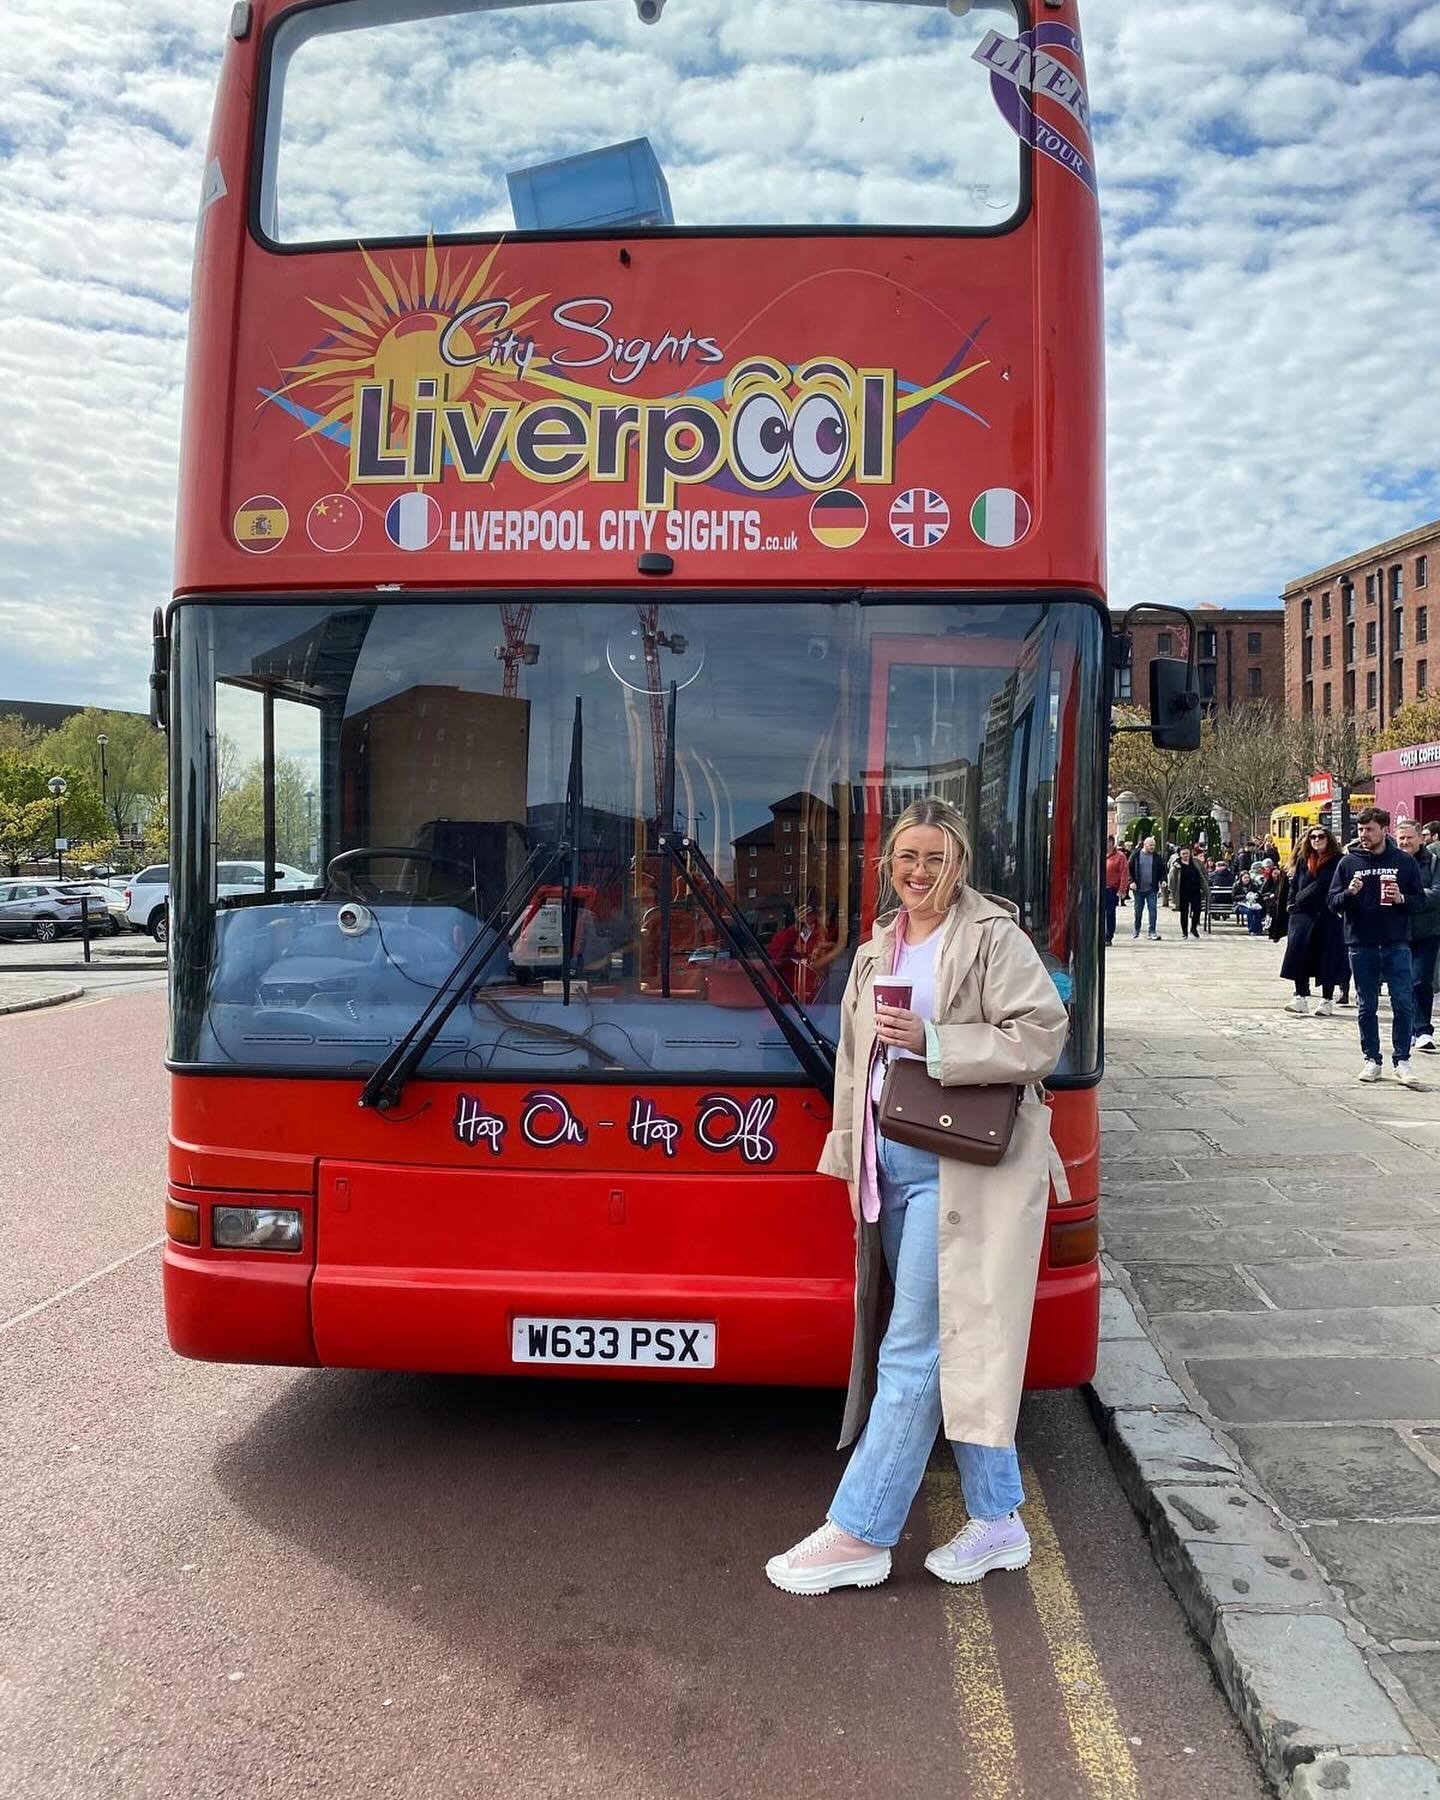 Gogglebox meets Liverpool City Sights 📺 👀 🚌 

@izziwarner thank you for joining us 🙌